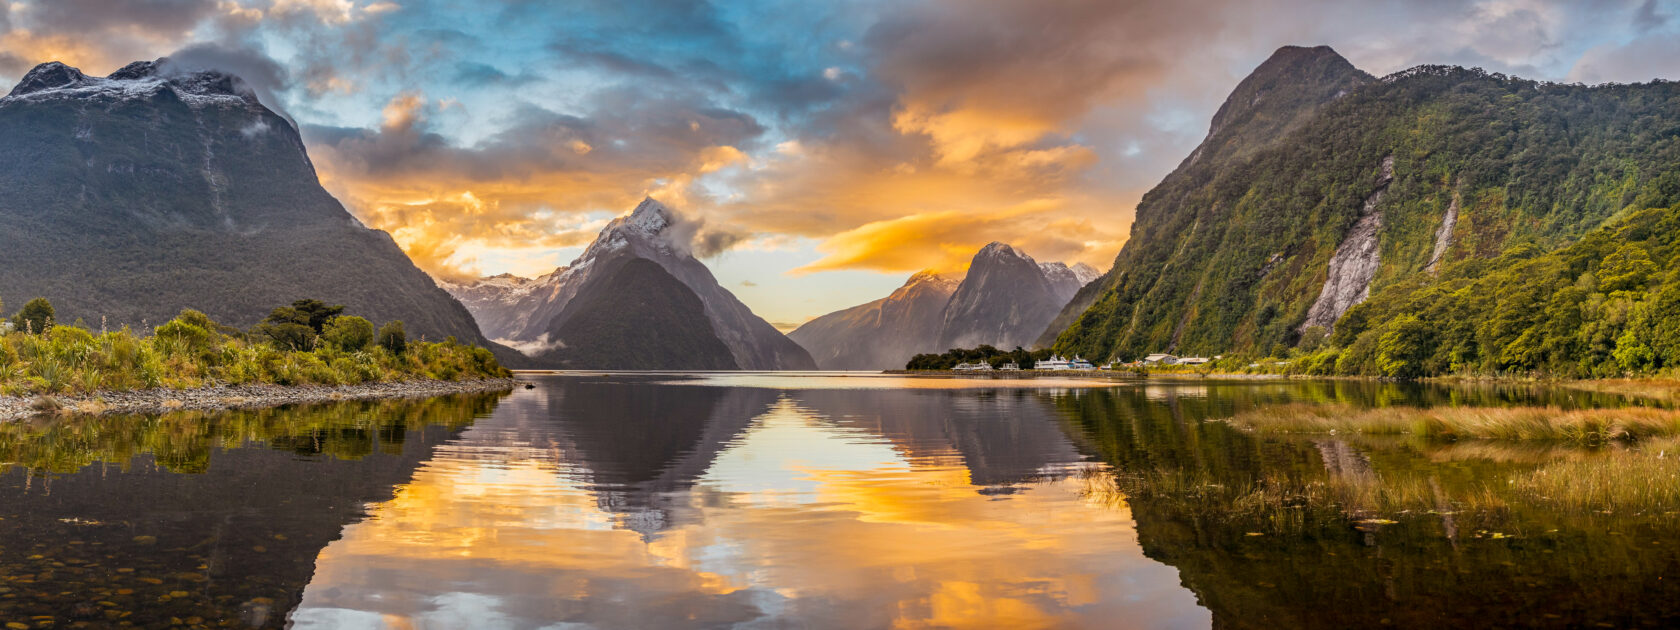 Mitre Peak reflecting in the water, sunset, Milford Sound, Fiordland National Park, Te Anau, Southland Region, Southland, New Zealand